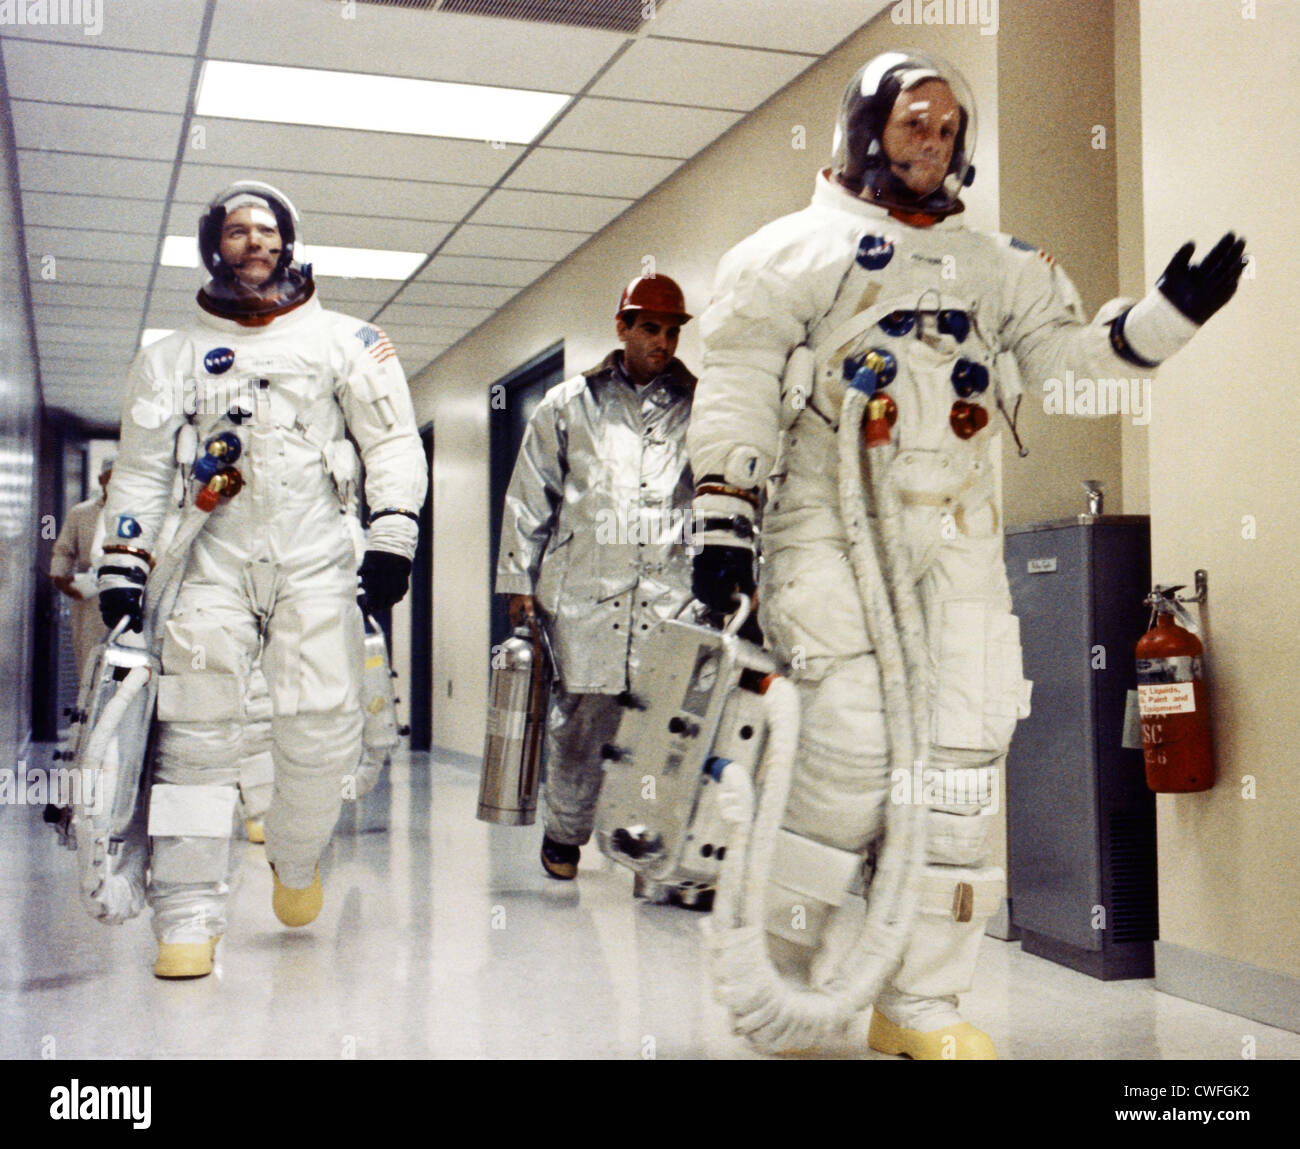 NASA Astronauts Neil A. Armstrong waves to well-wishers in the hallway of the Manned Spacecraft Operations Building as he and Michael Collins and Edwin E. Aldrin Jr. prepare to be transported to Launch Complex 39A to enter their Apollo 11 spacecraft July 16, 1969 at the Kennedy Space Center, Florida. The crew is scheduled for lift-off on the first manned mission to the surface of the moon. Stock Photo